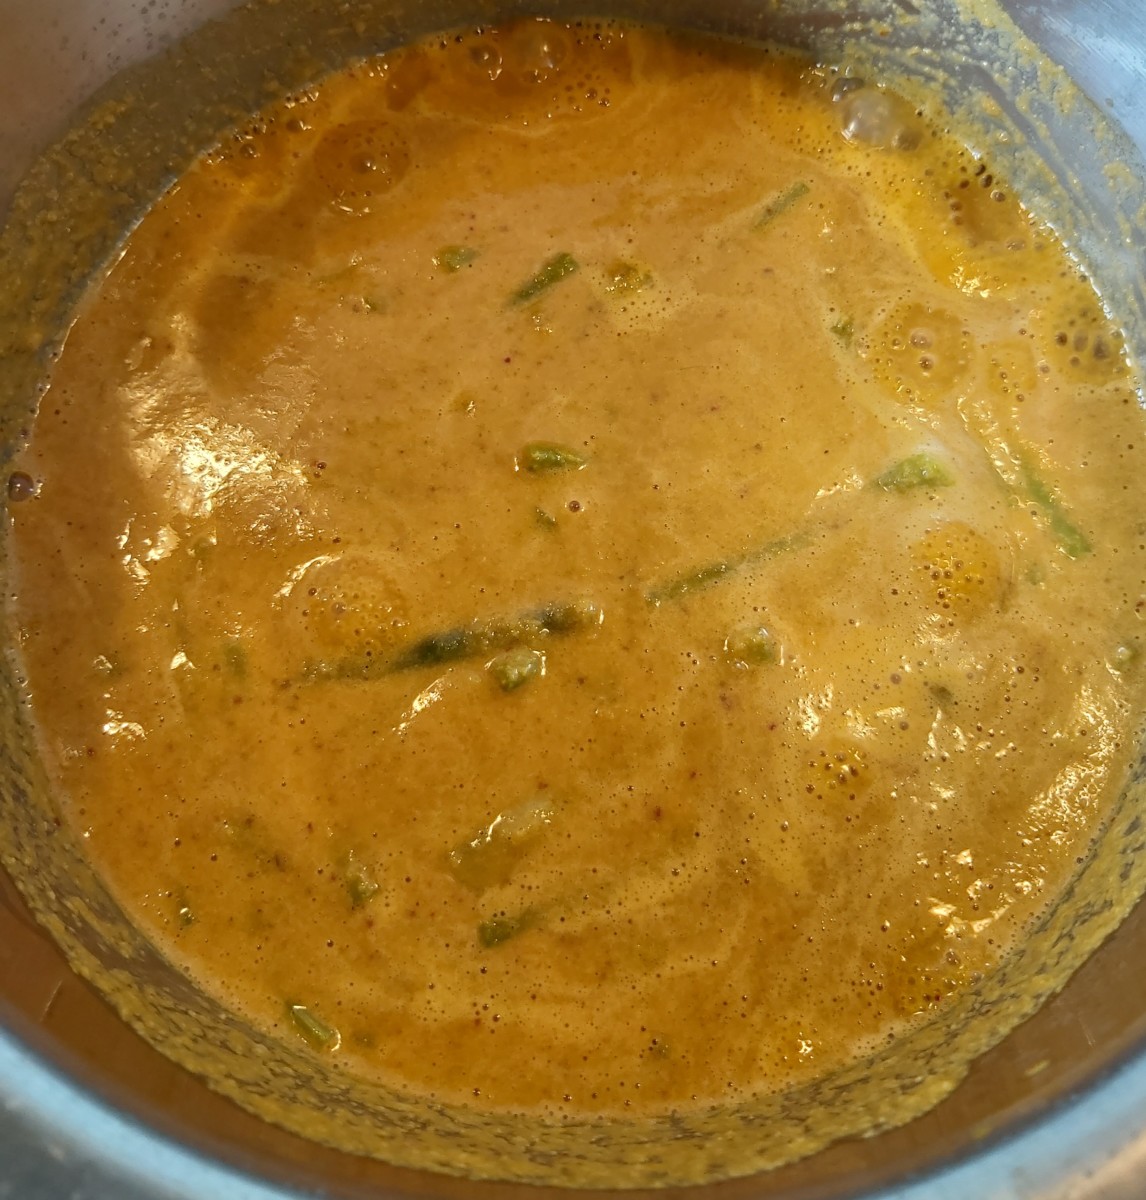 Mix well and cook over medium flame to let the beans absorb the flavor of the masala. Stir at intervals. Add more water if you feel your sambar is too thick. Adjust salt.